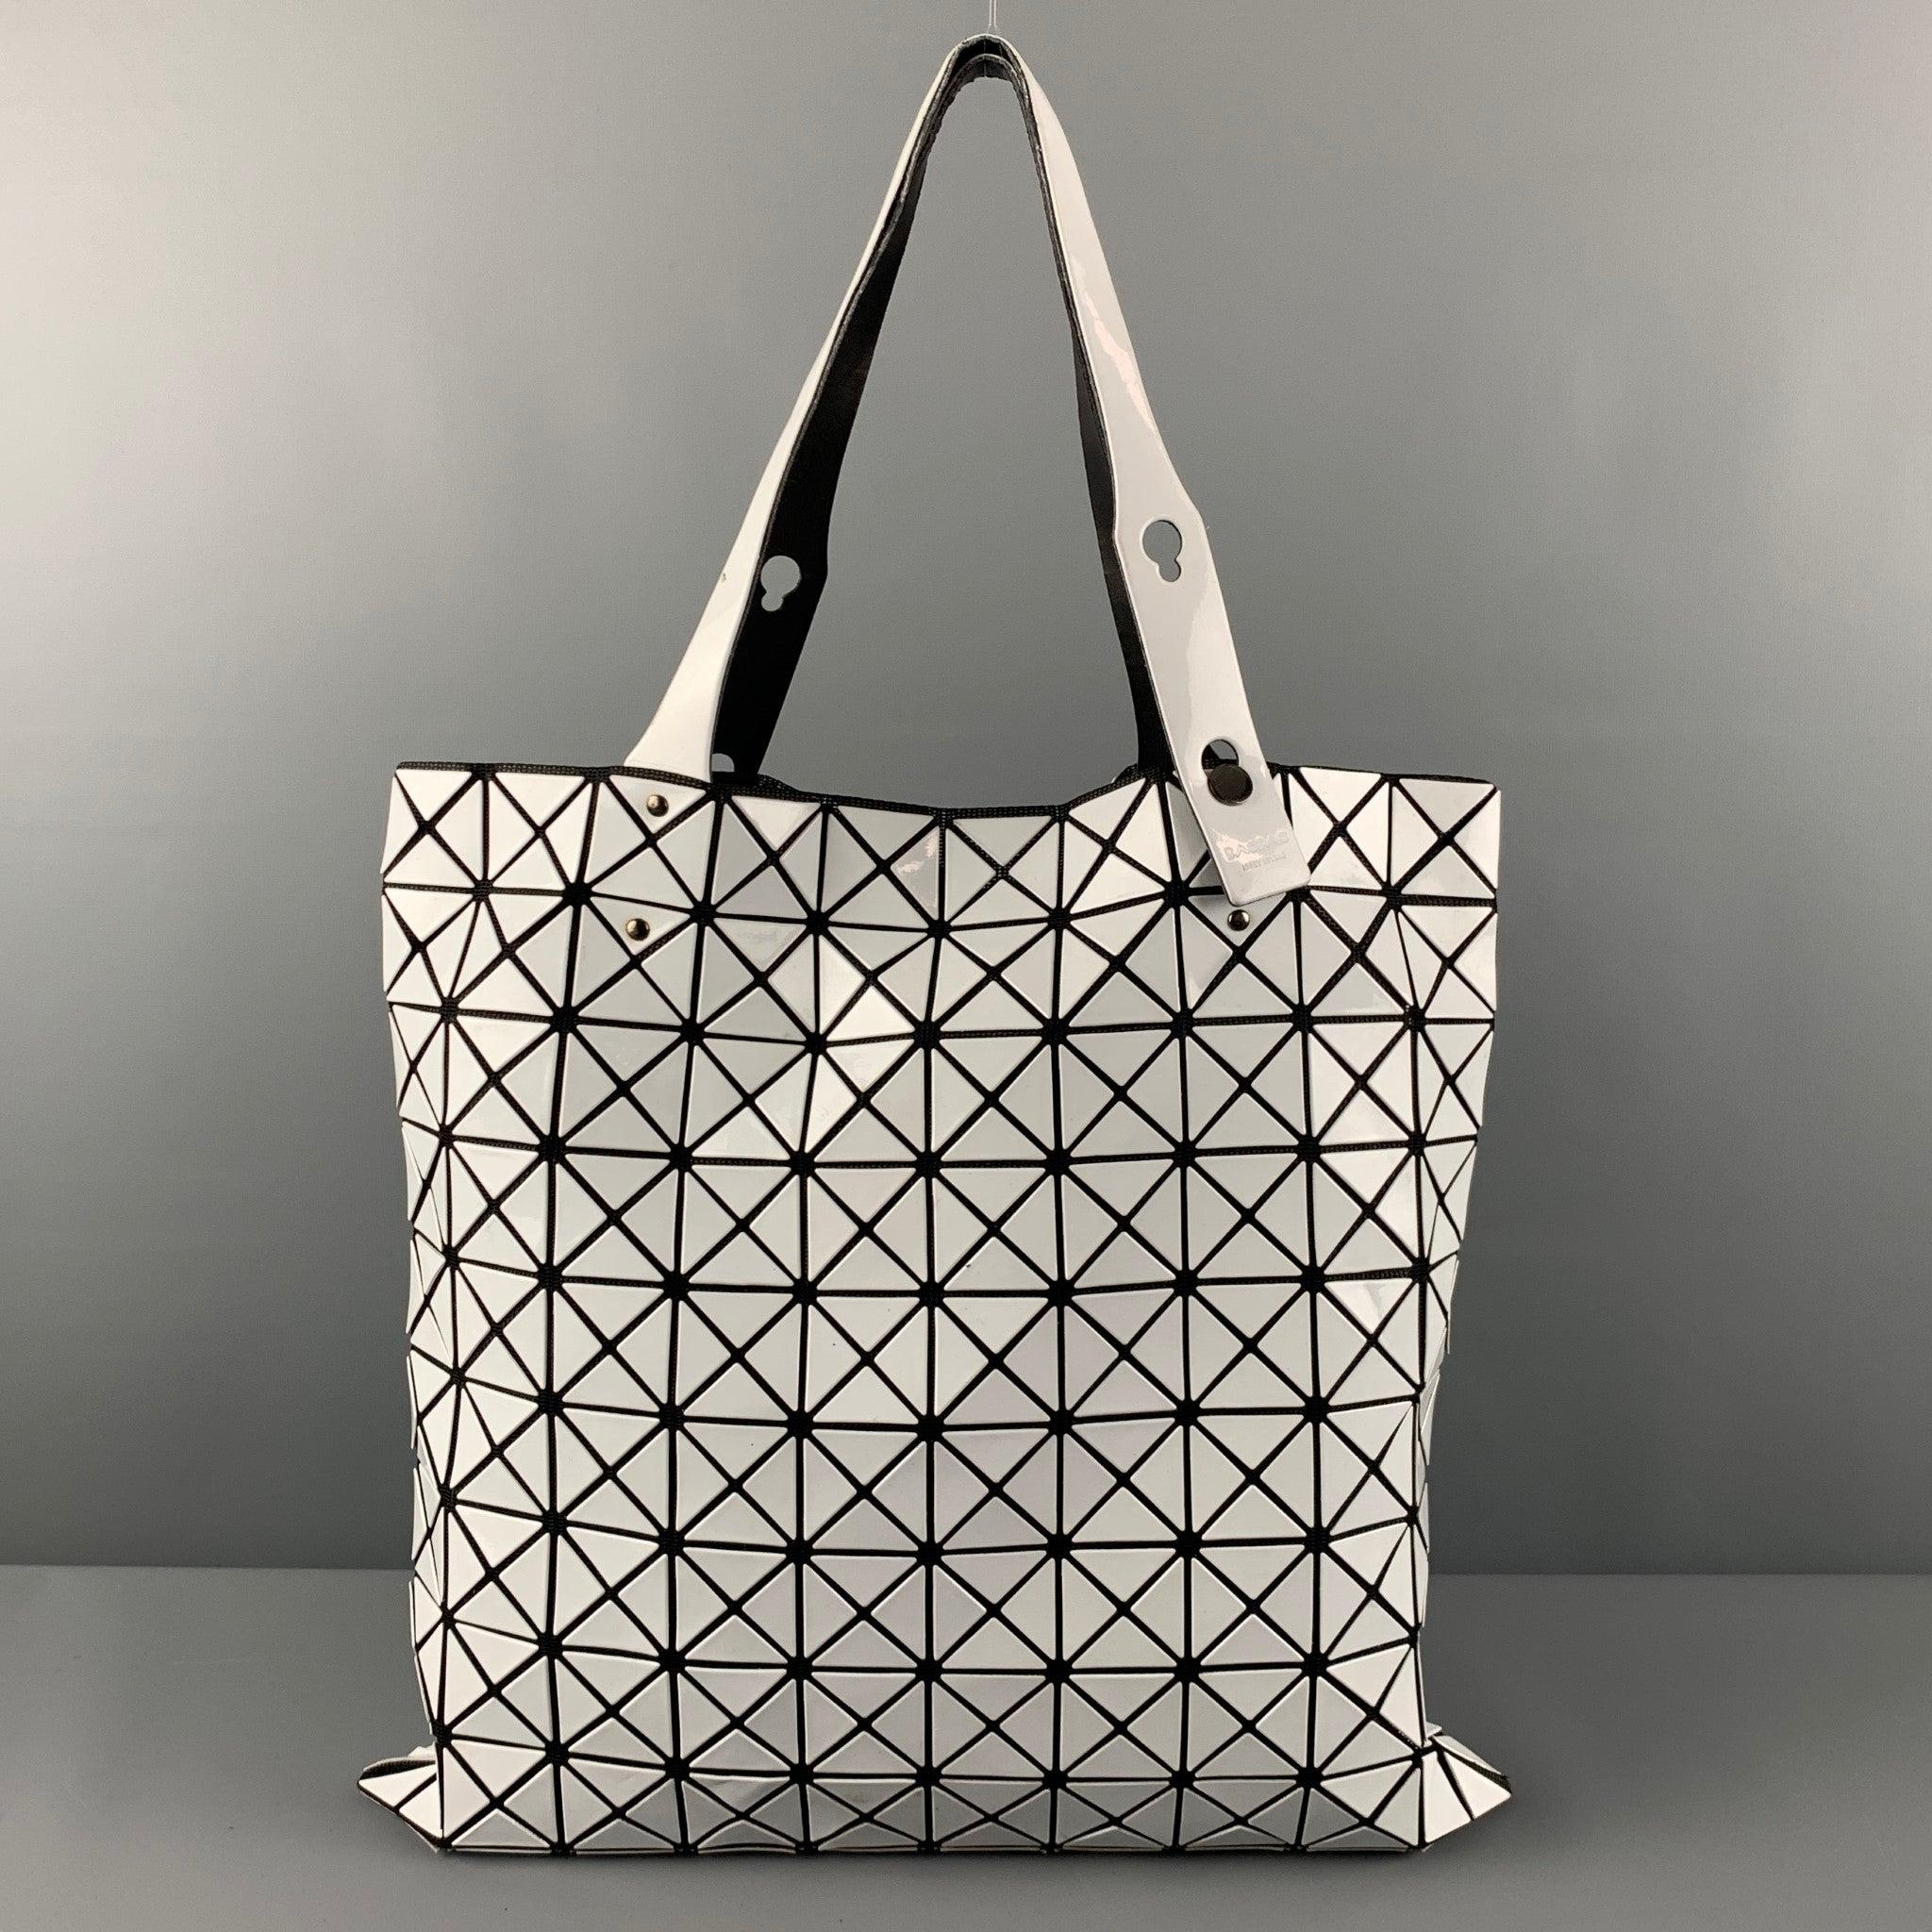 Men's ISSEY MIYAKE White Black Triangle PVC Tote Handbag & Leather Goods For Sale